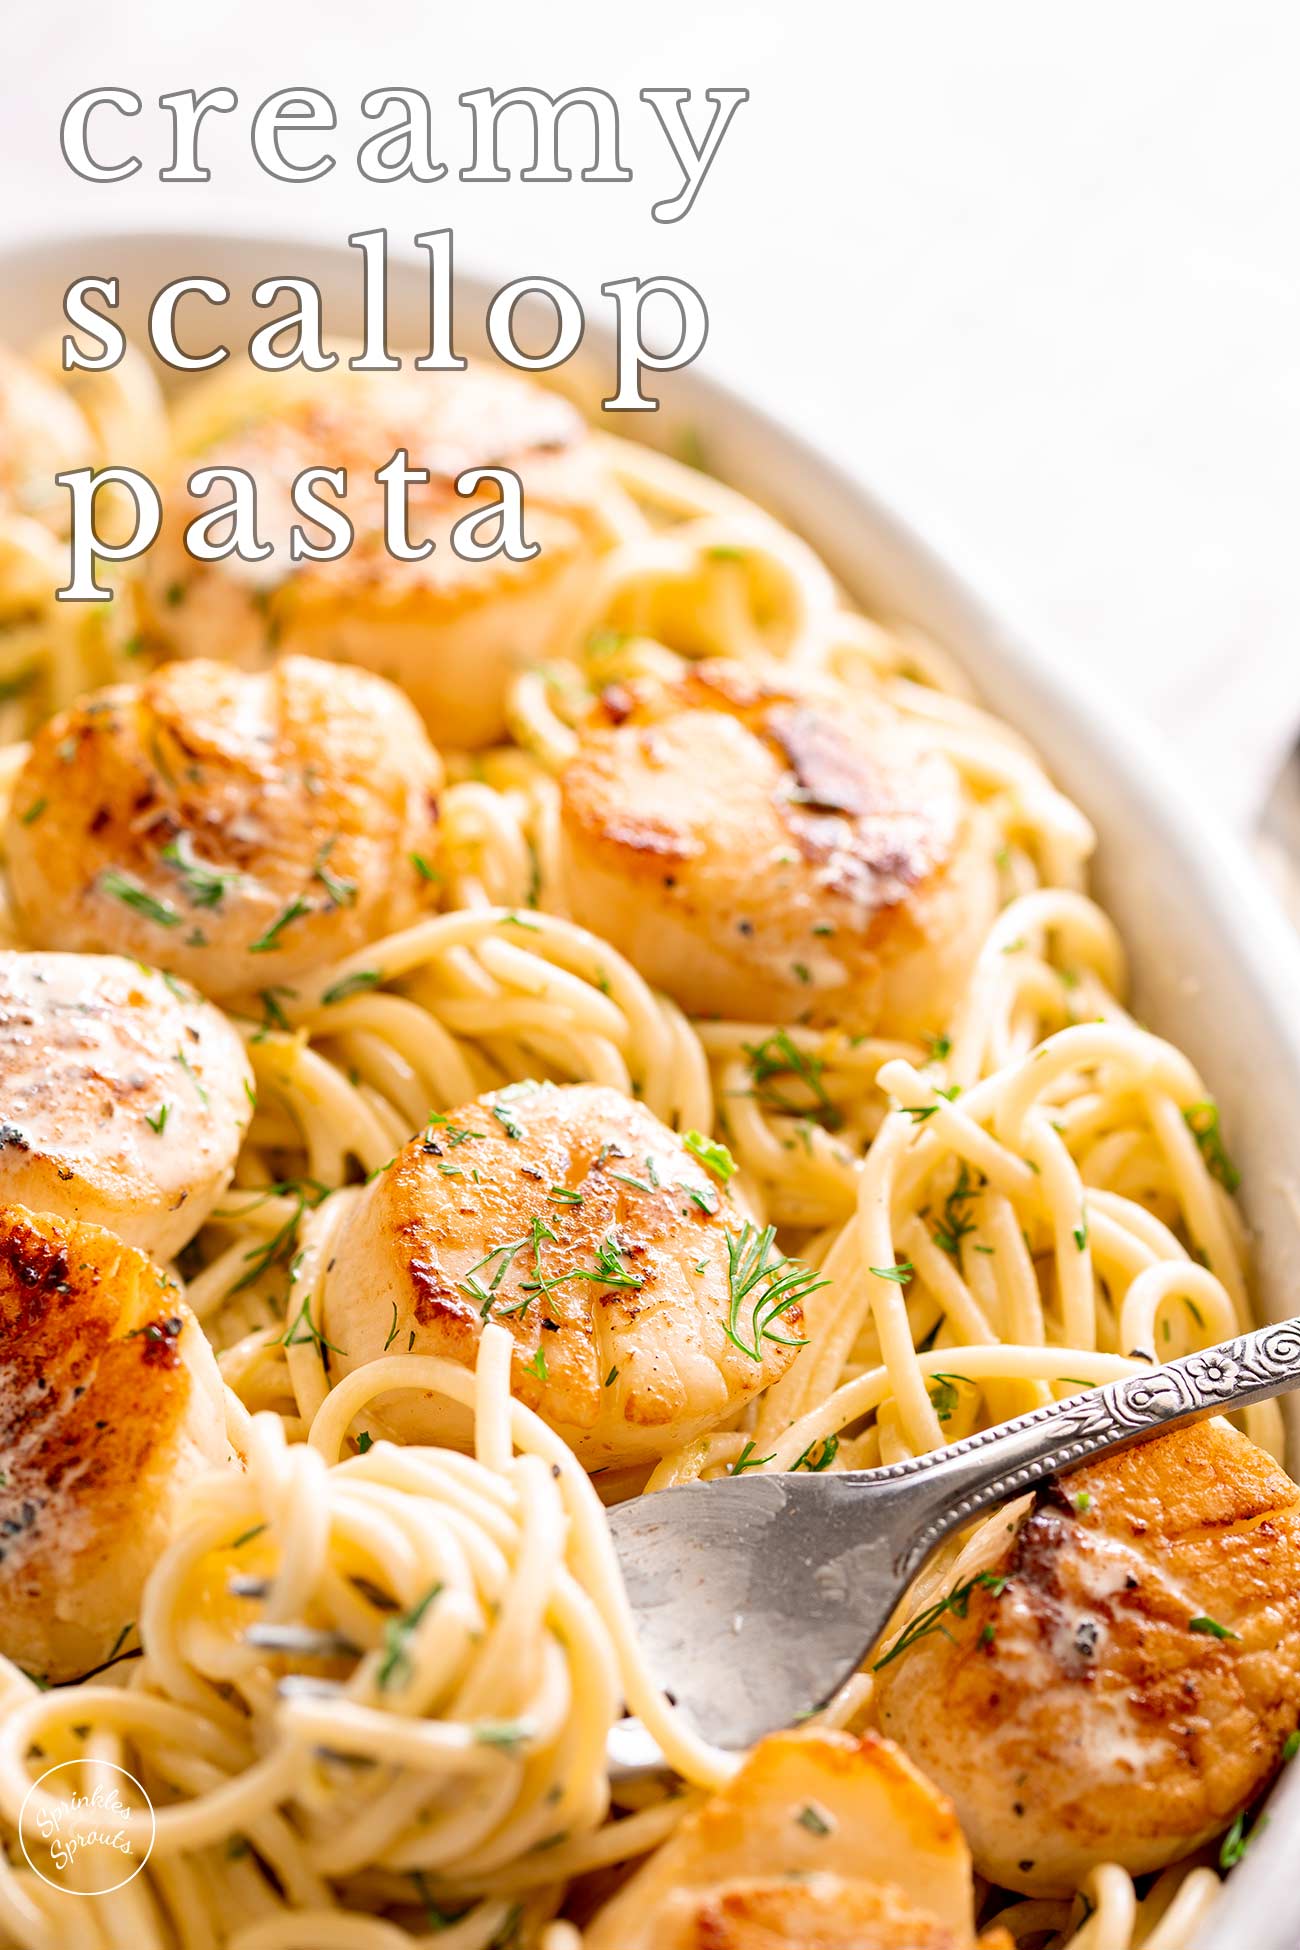 PINTEREST IMAGE - Creamy scallop pasta with text overlay